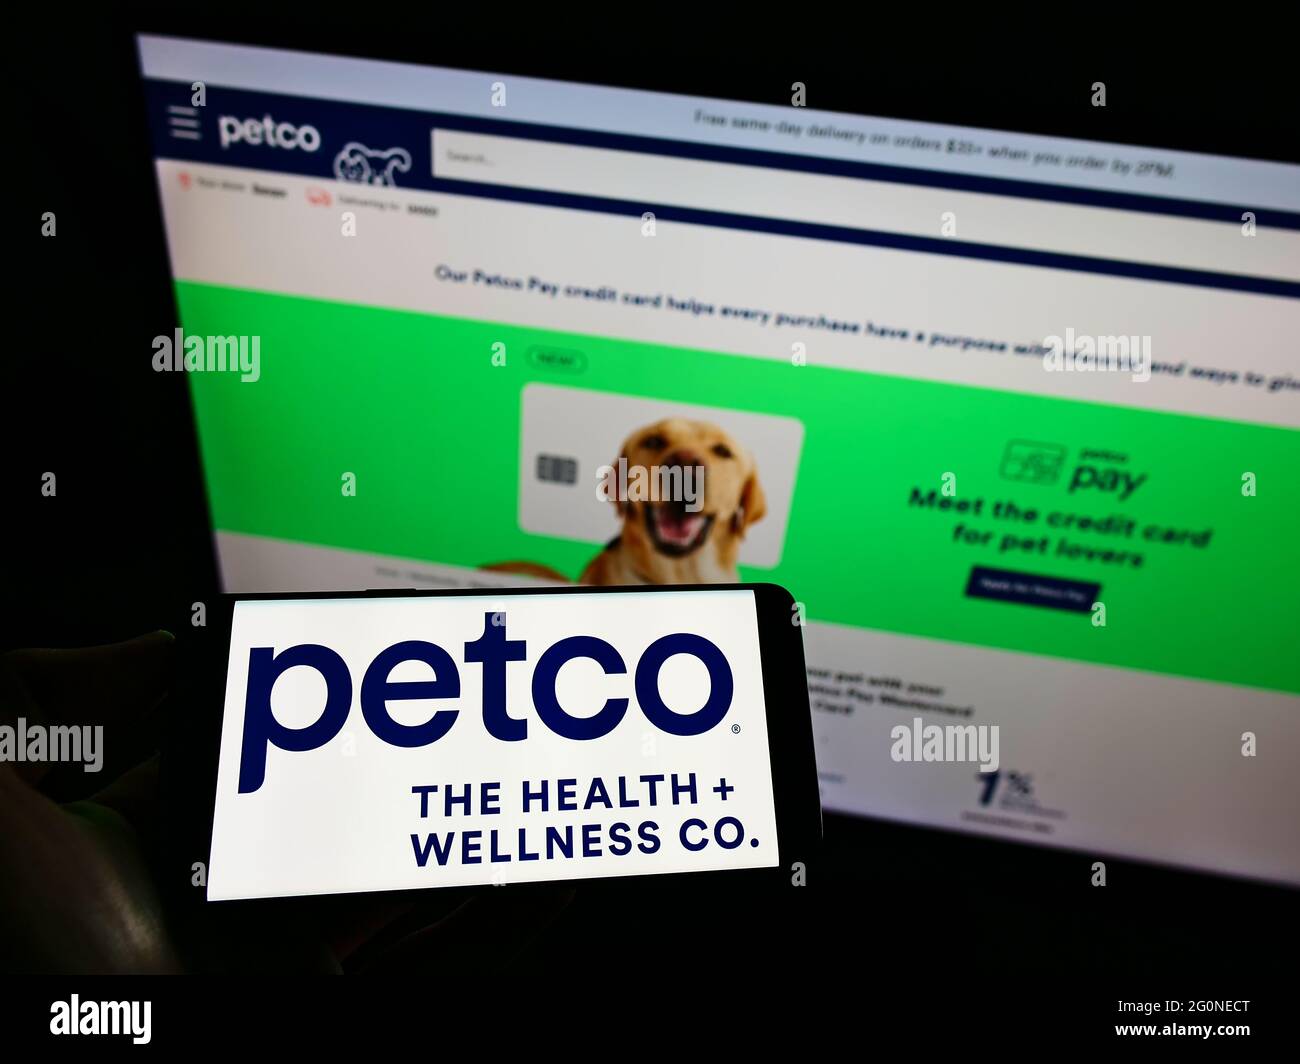 Person holding smartphone with logo of US pet retailer Petco Health and Wellness Company Inc. on screen in front of website. Focus on phone display. Stock Photo